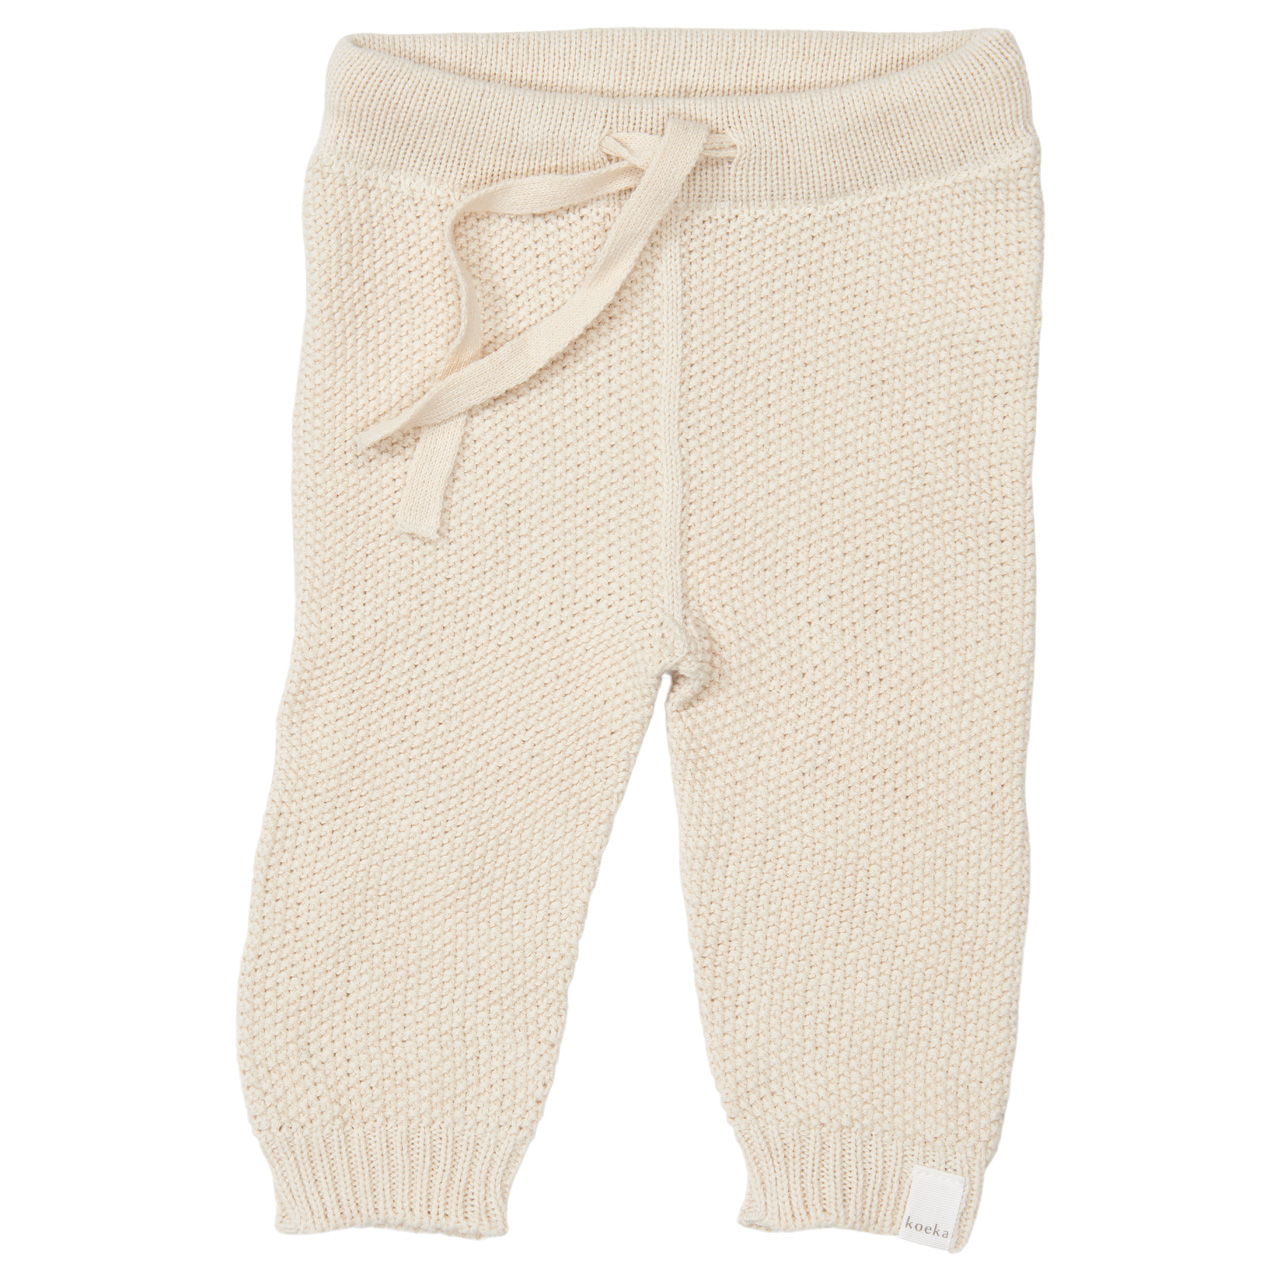 Baby pants Nuts warm white